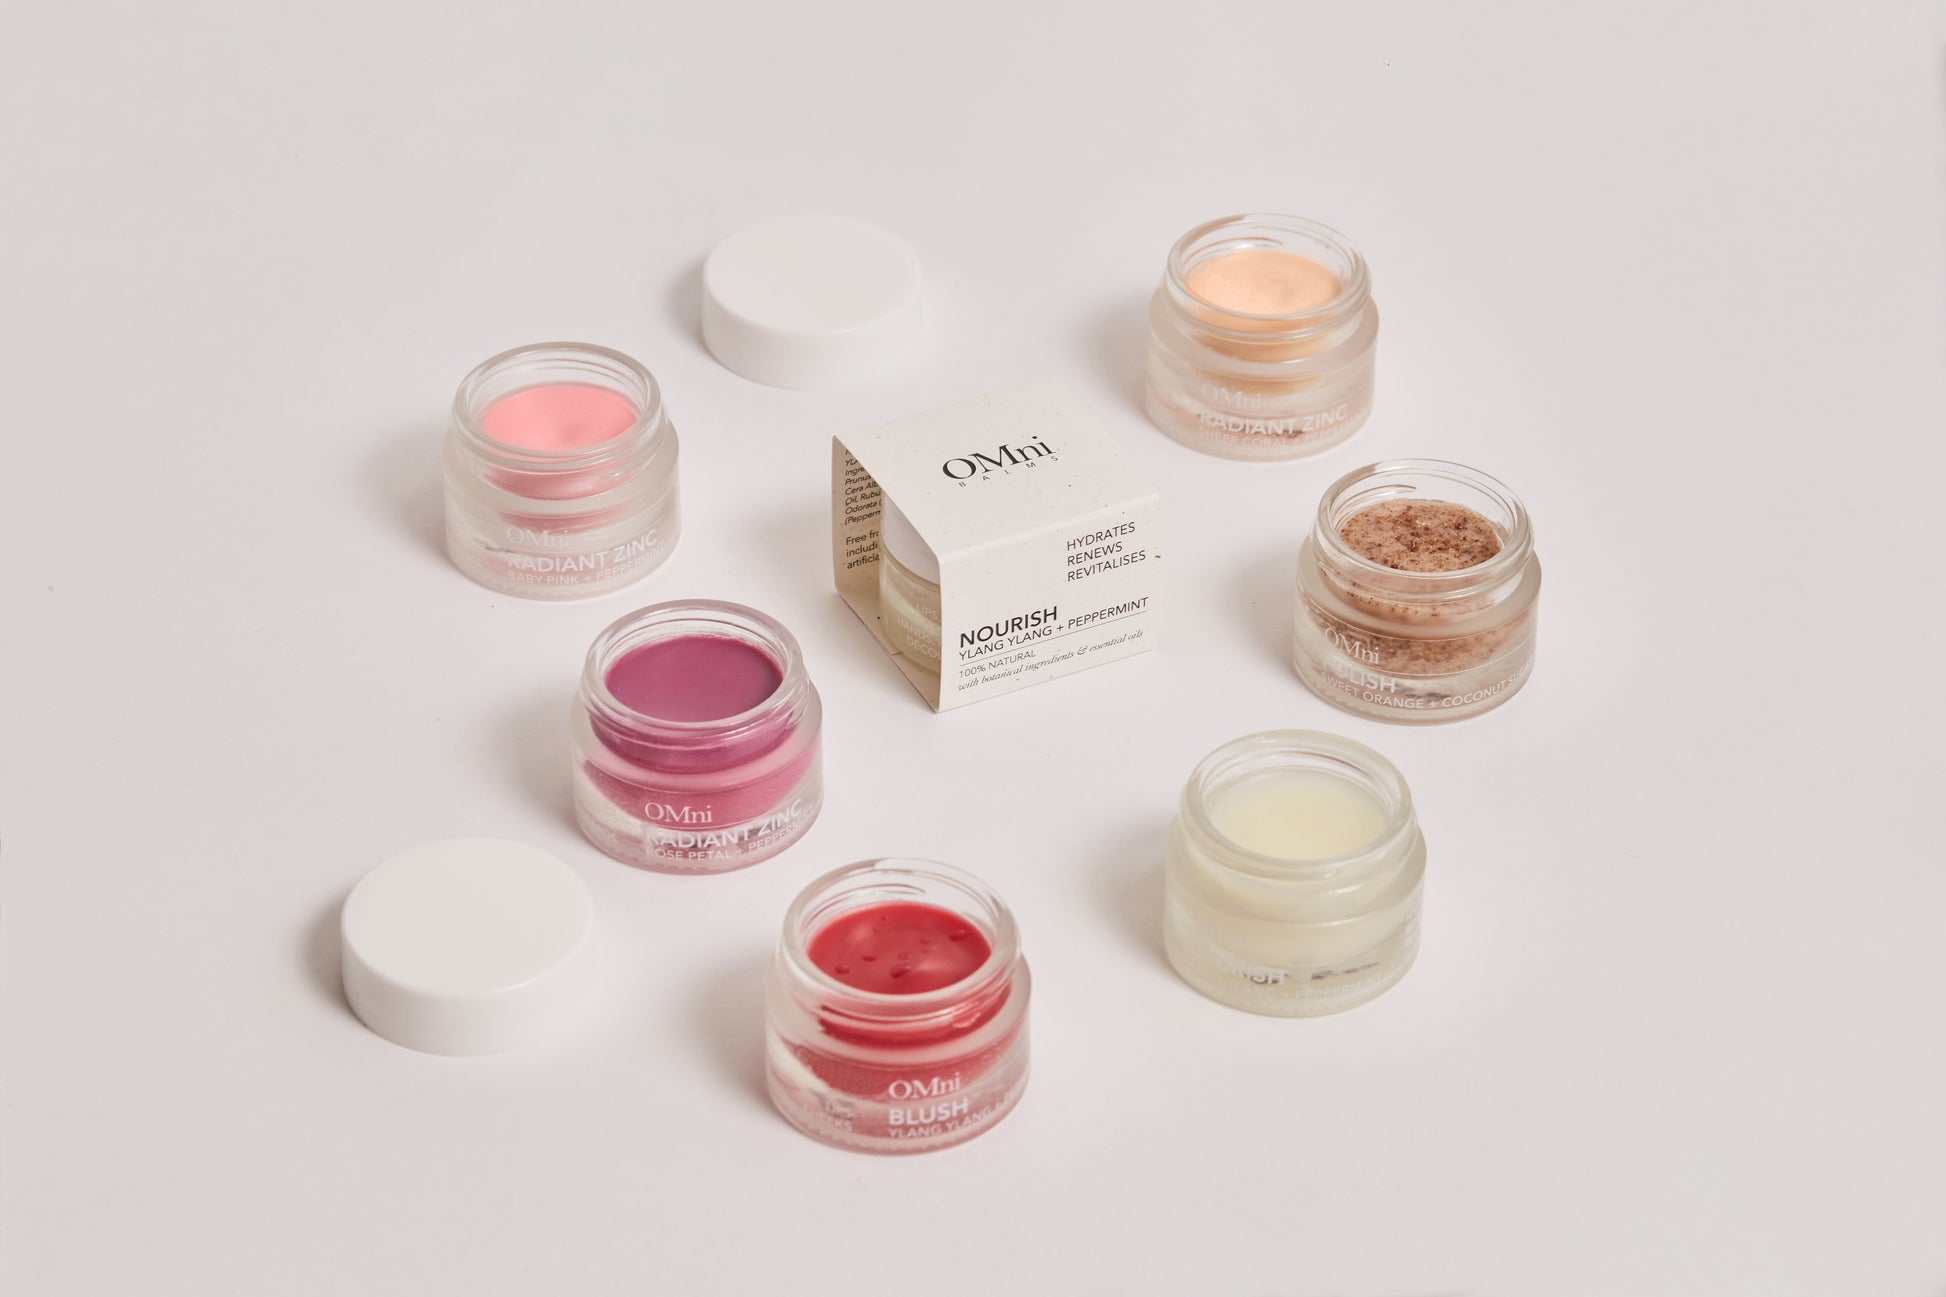 OMni Balms range of natural multi-use balms for dry skin and lips